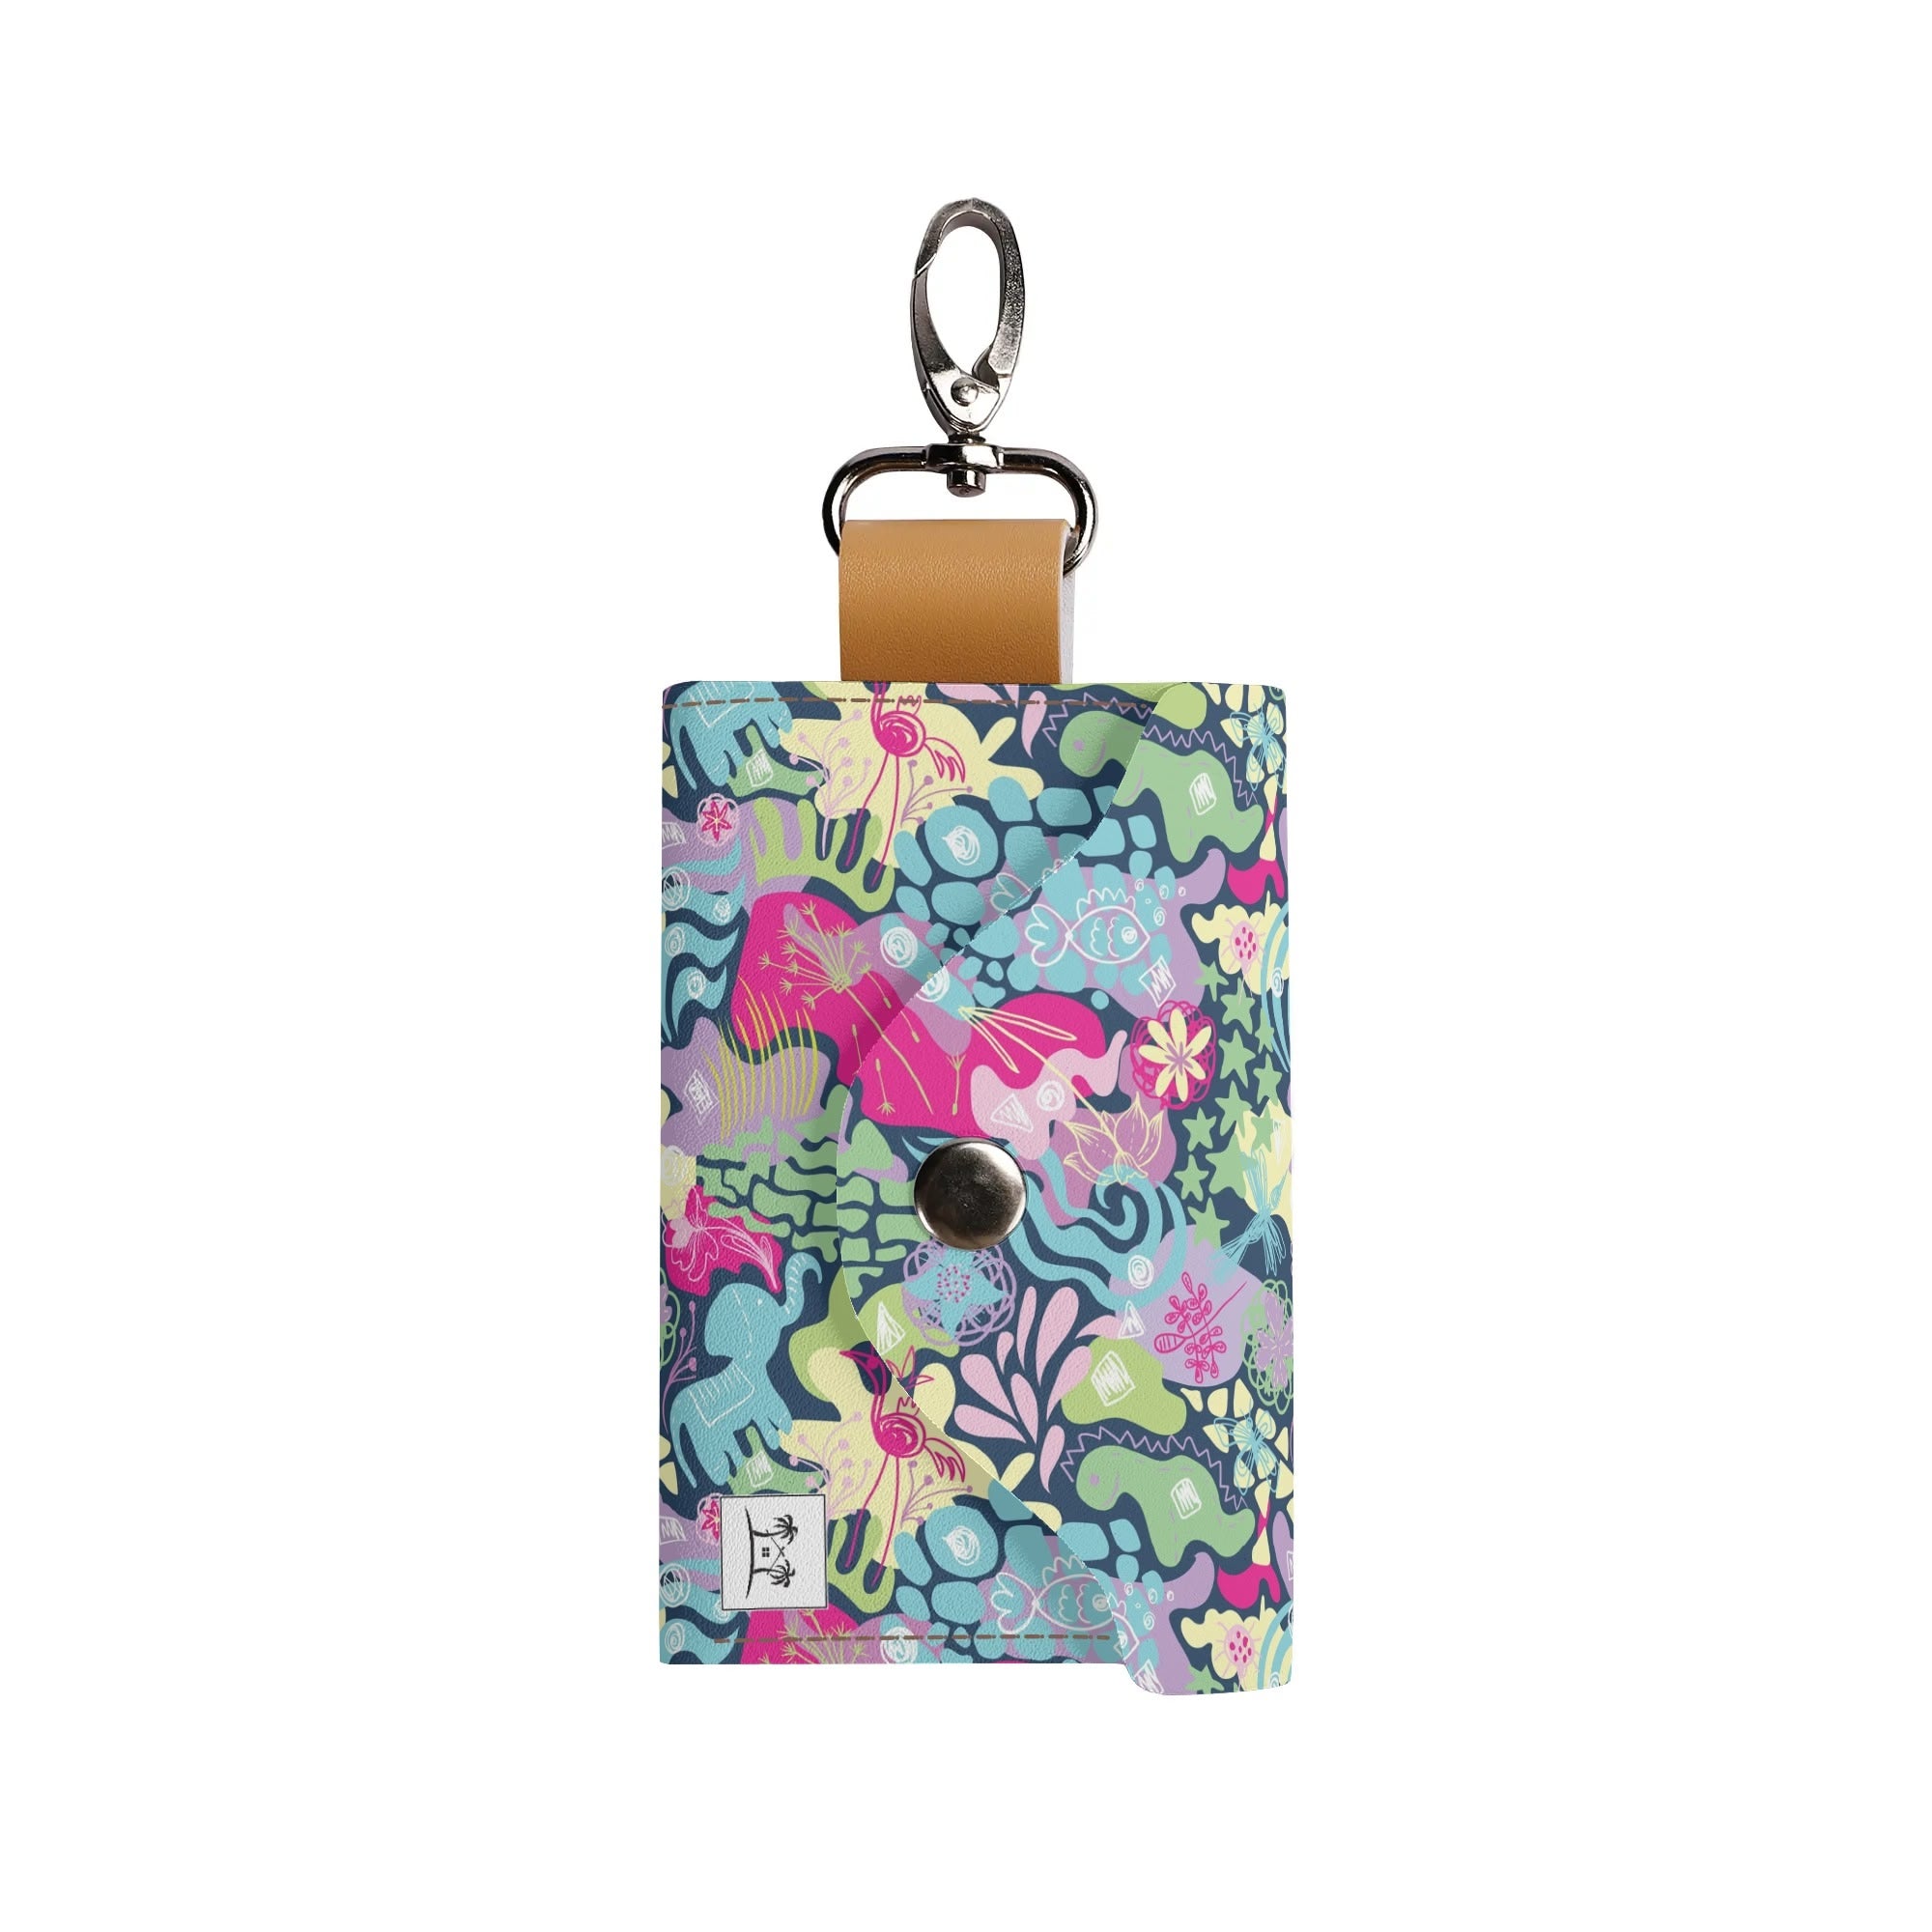 Women's Faux Leather Keychain Purse - Doodle Me This